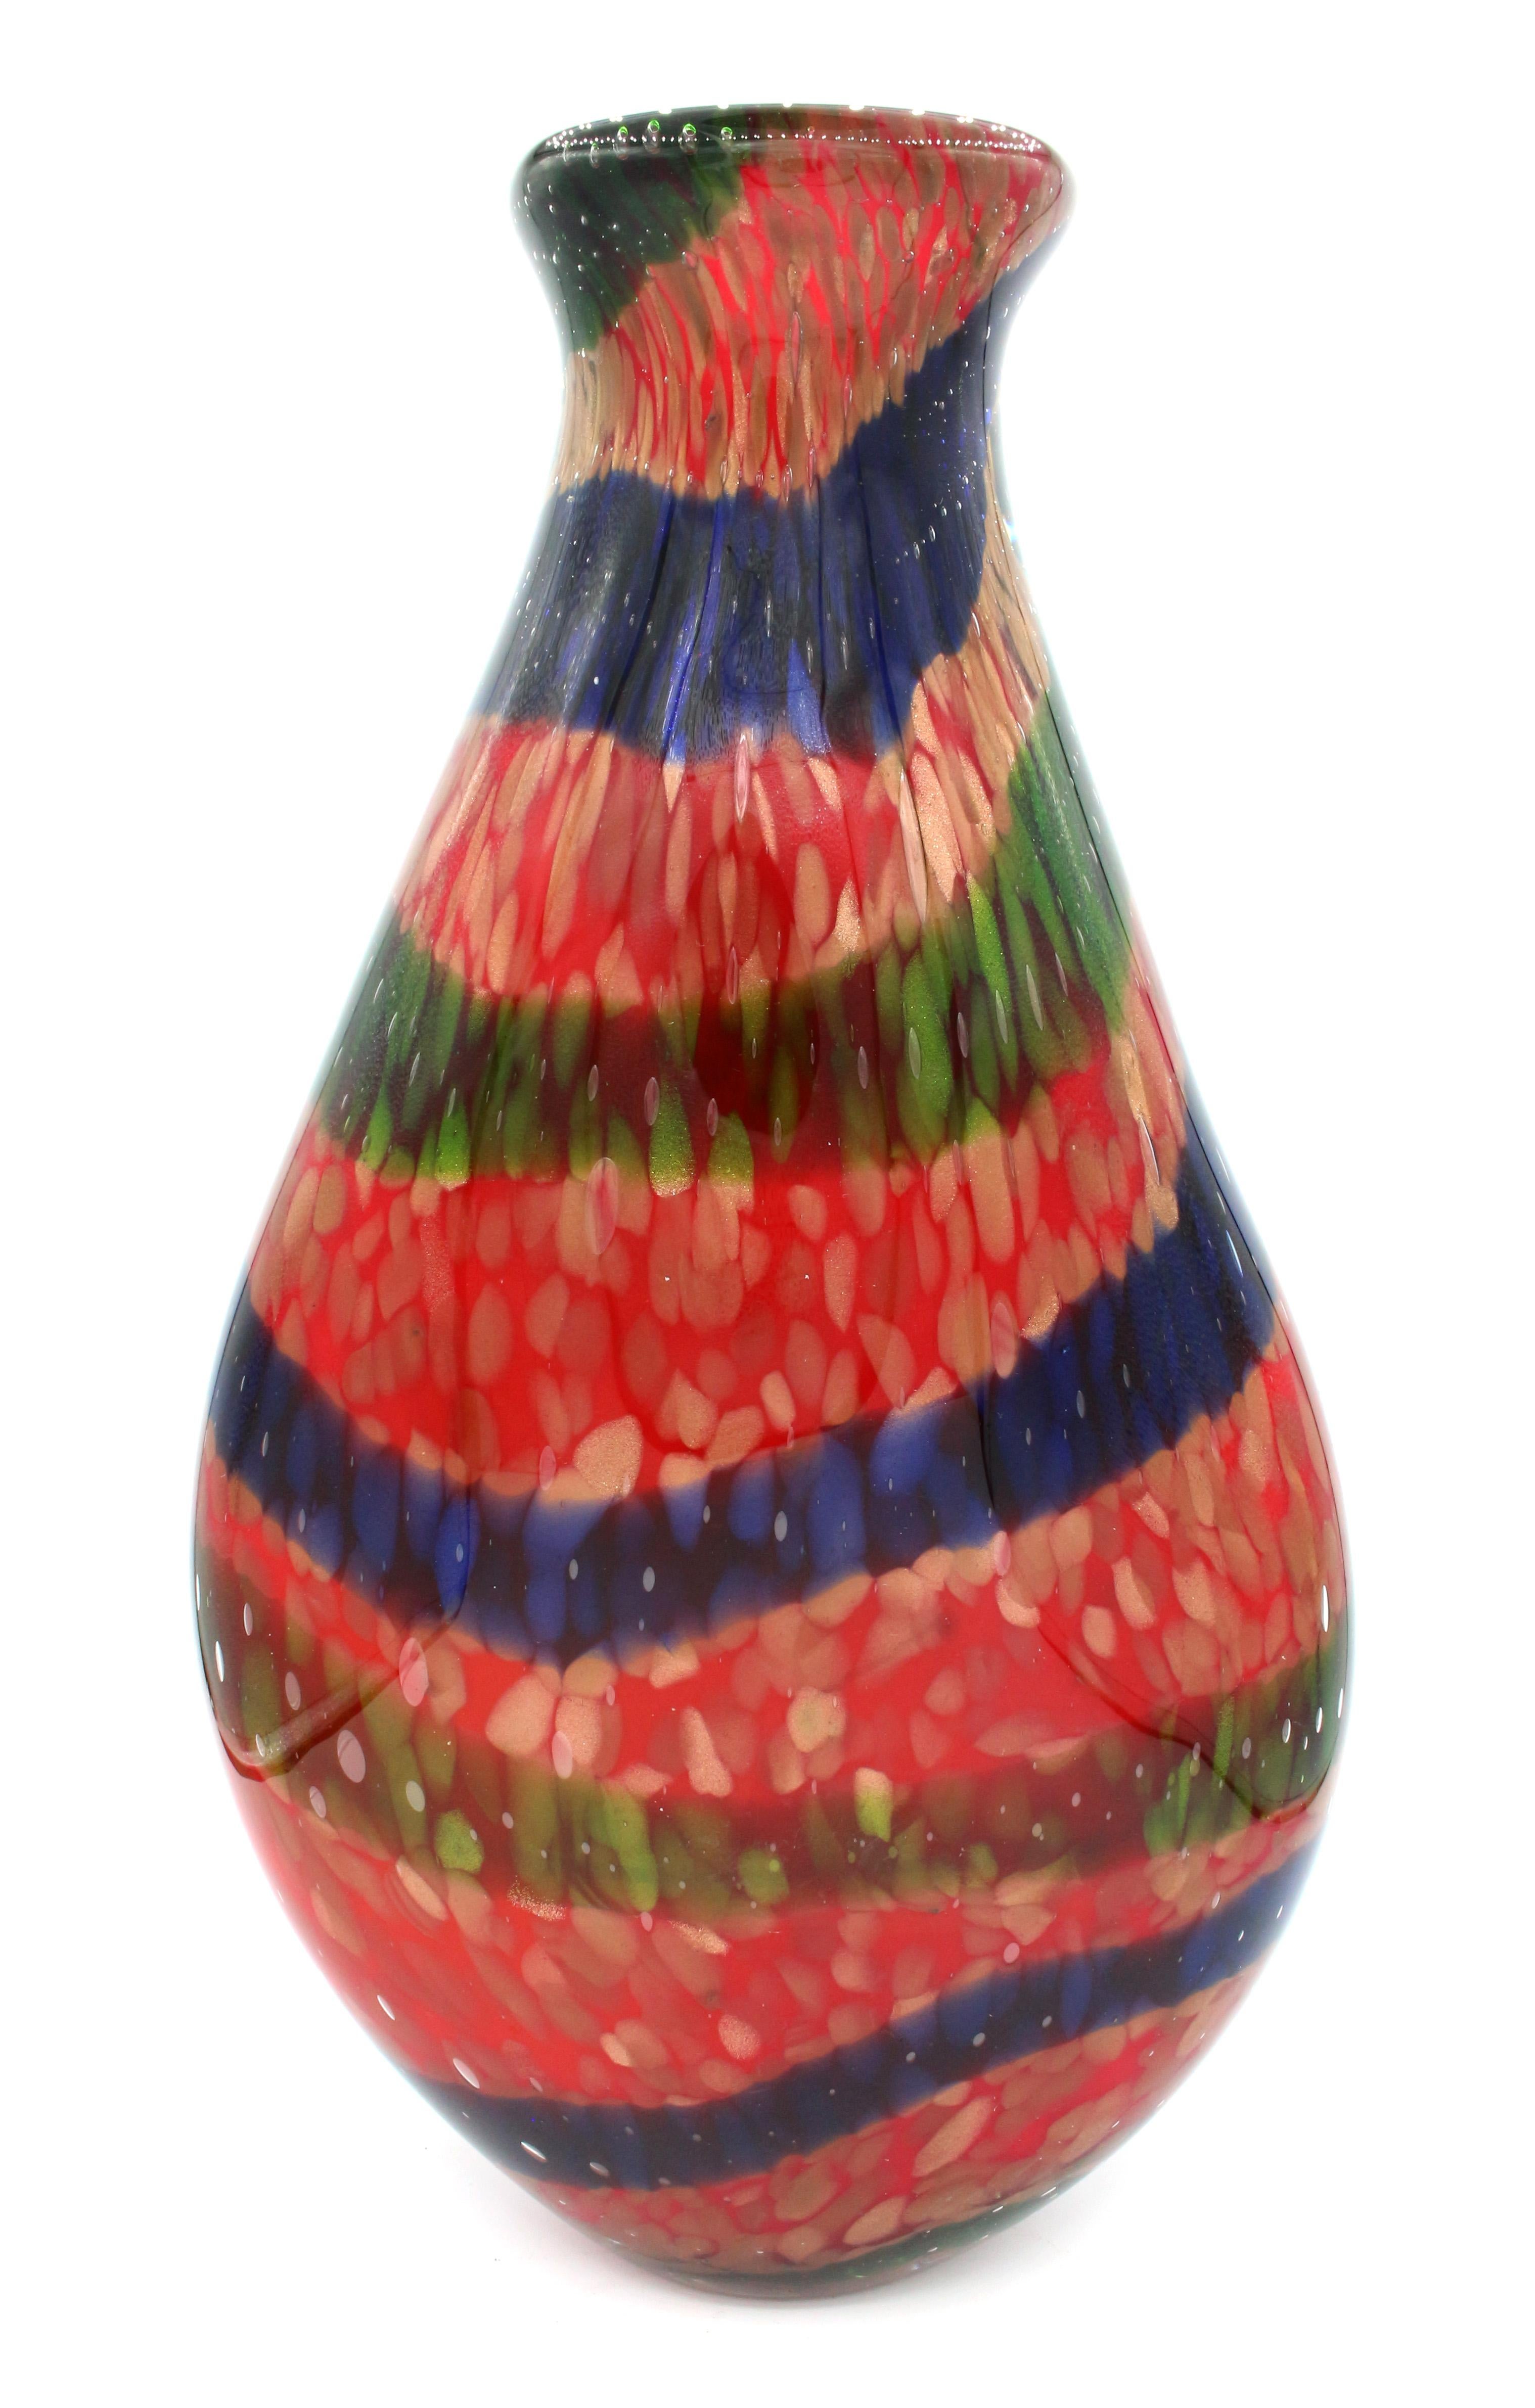 Murano blown glass, cased glass vase of large flask form, c.1960s, Italian. The body filled with aventurine flecking & bubbles through blue & green stripes on orange interior casing. Mid century modern. Unsigned.
16 5/8